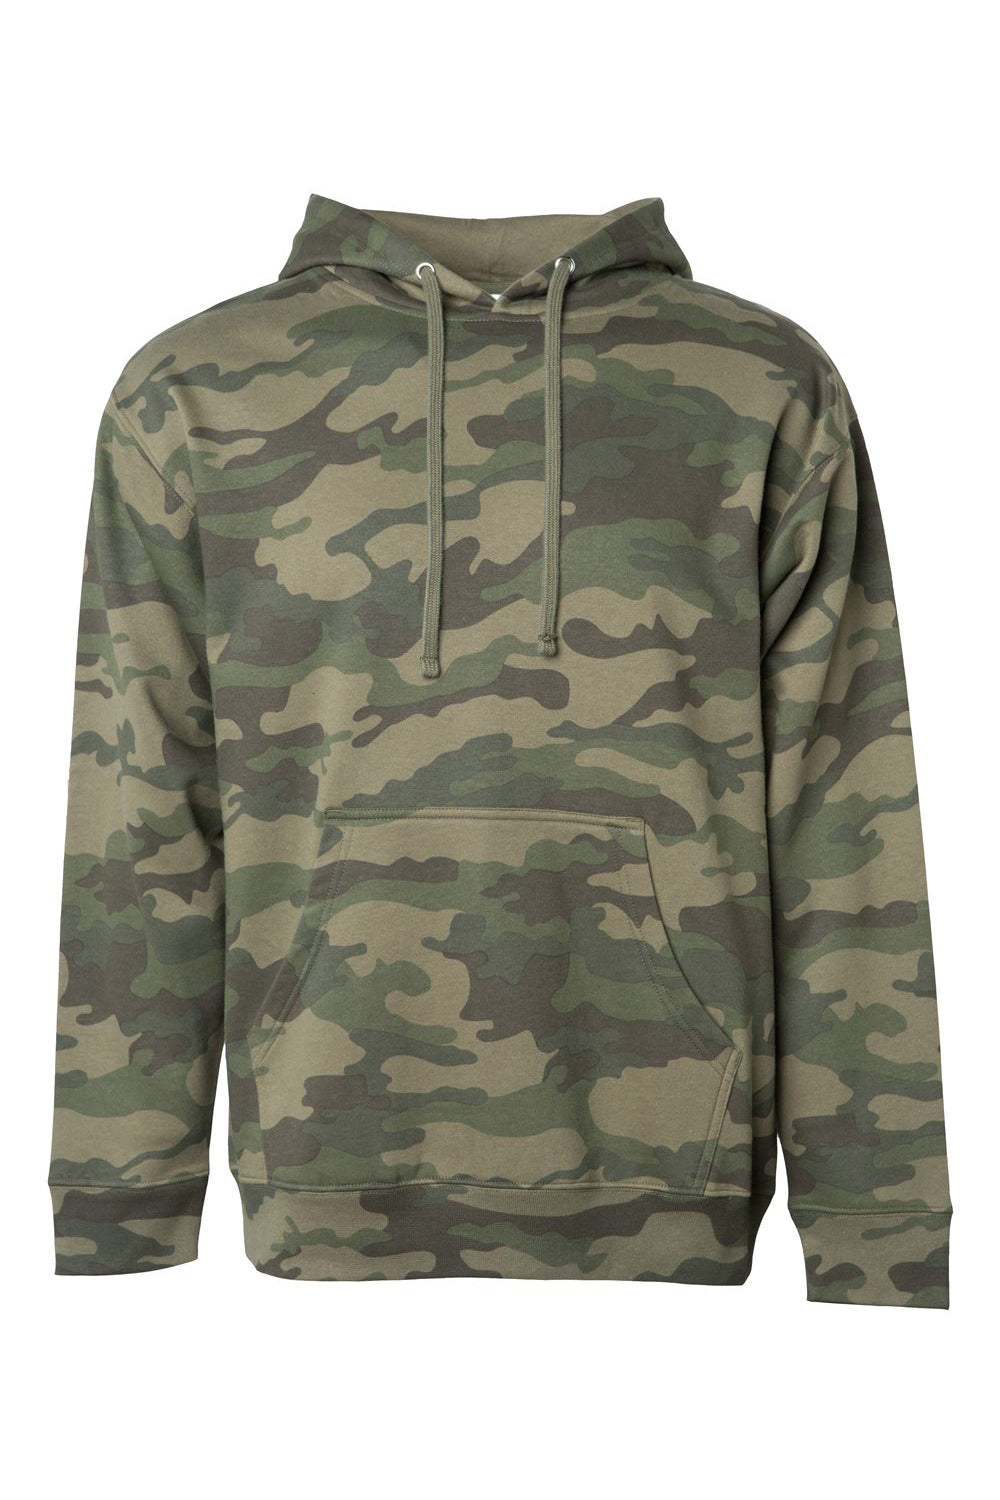 Independent Trading Co. SS4500 Mens Hooded Sweatshirt Hoodie Forest Green Camo Flat Front